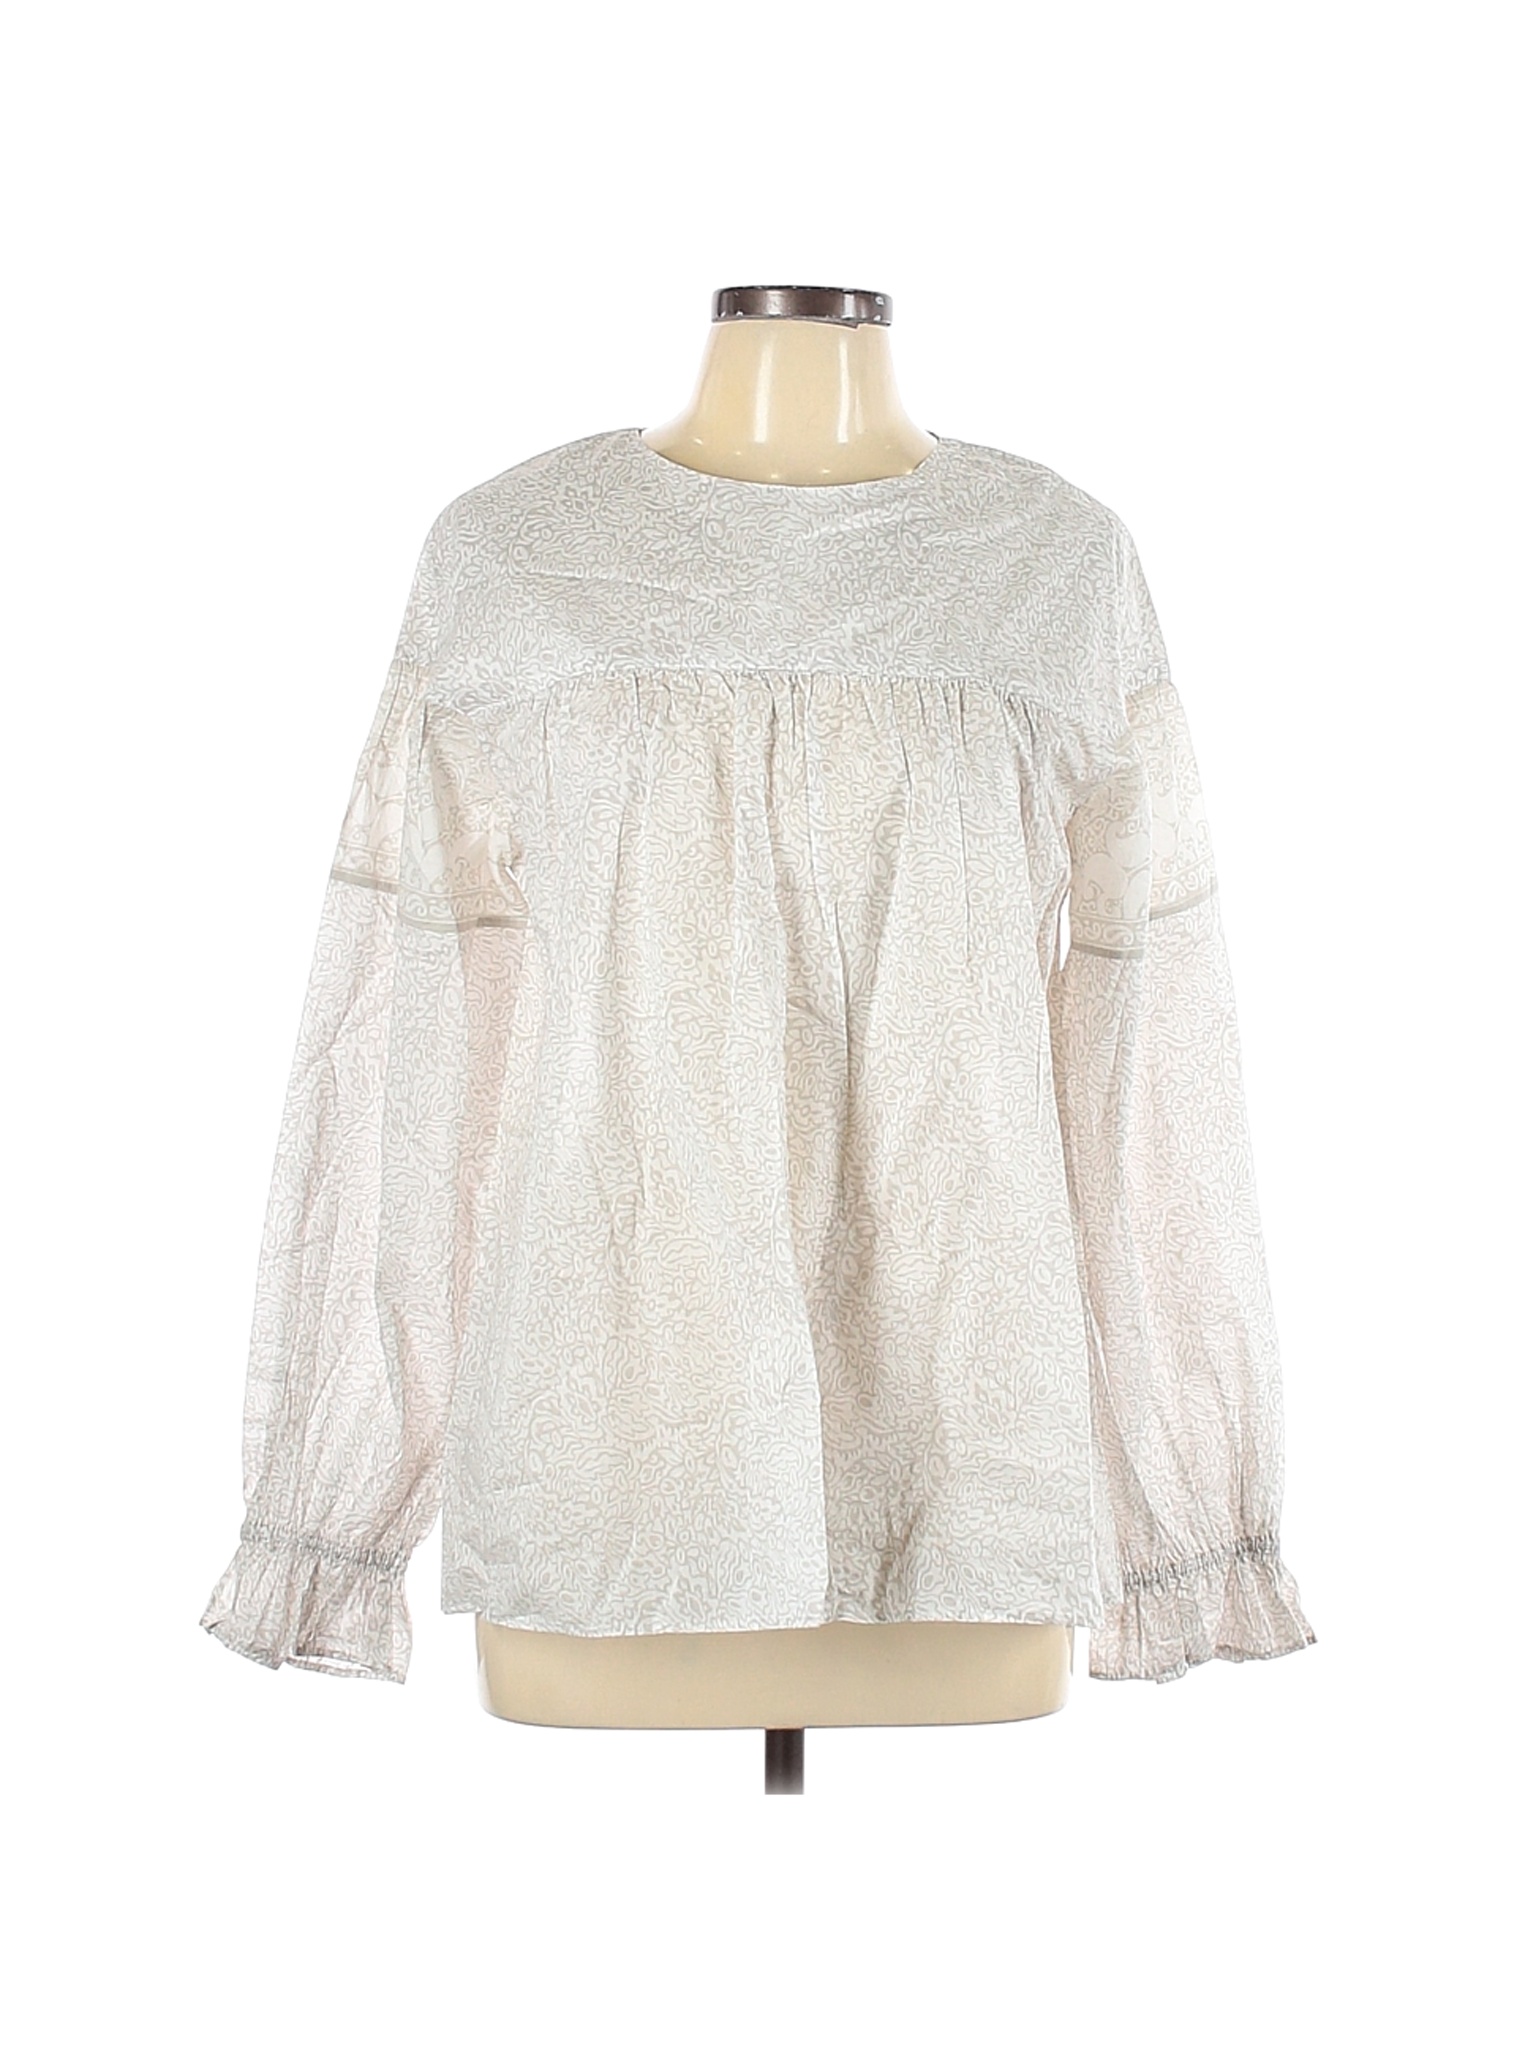 NWT Anna Sui for Uniqlo Women White Long Sleeve Blouse L | eBay